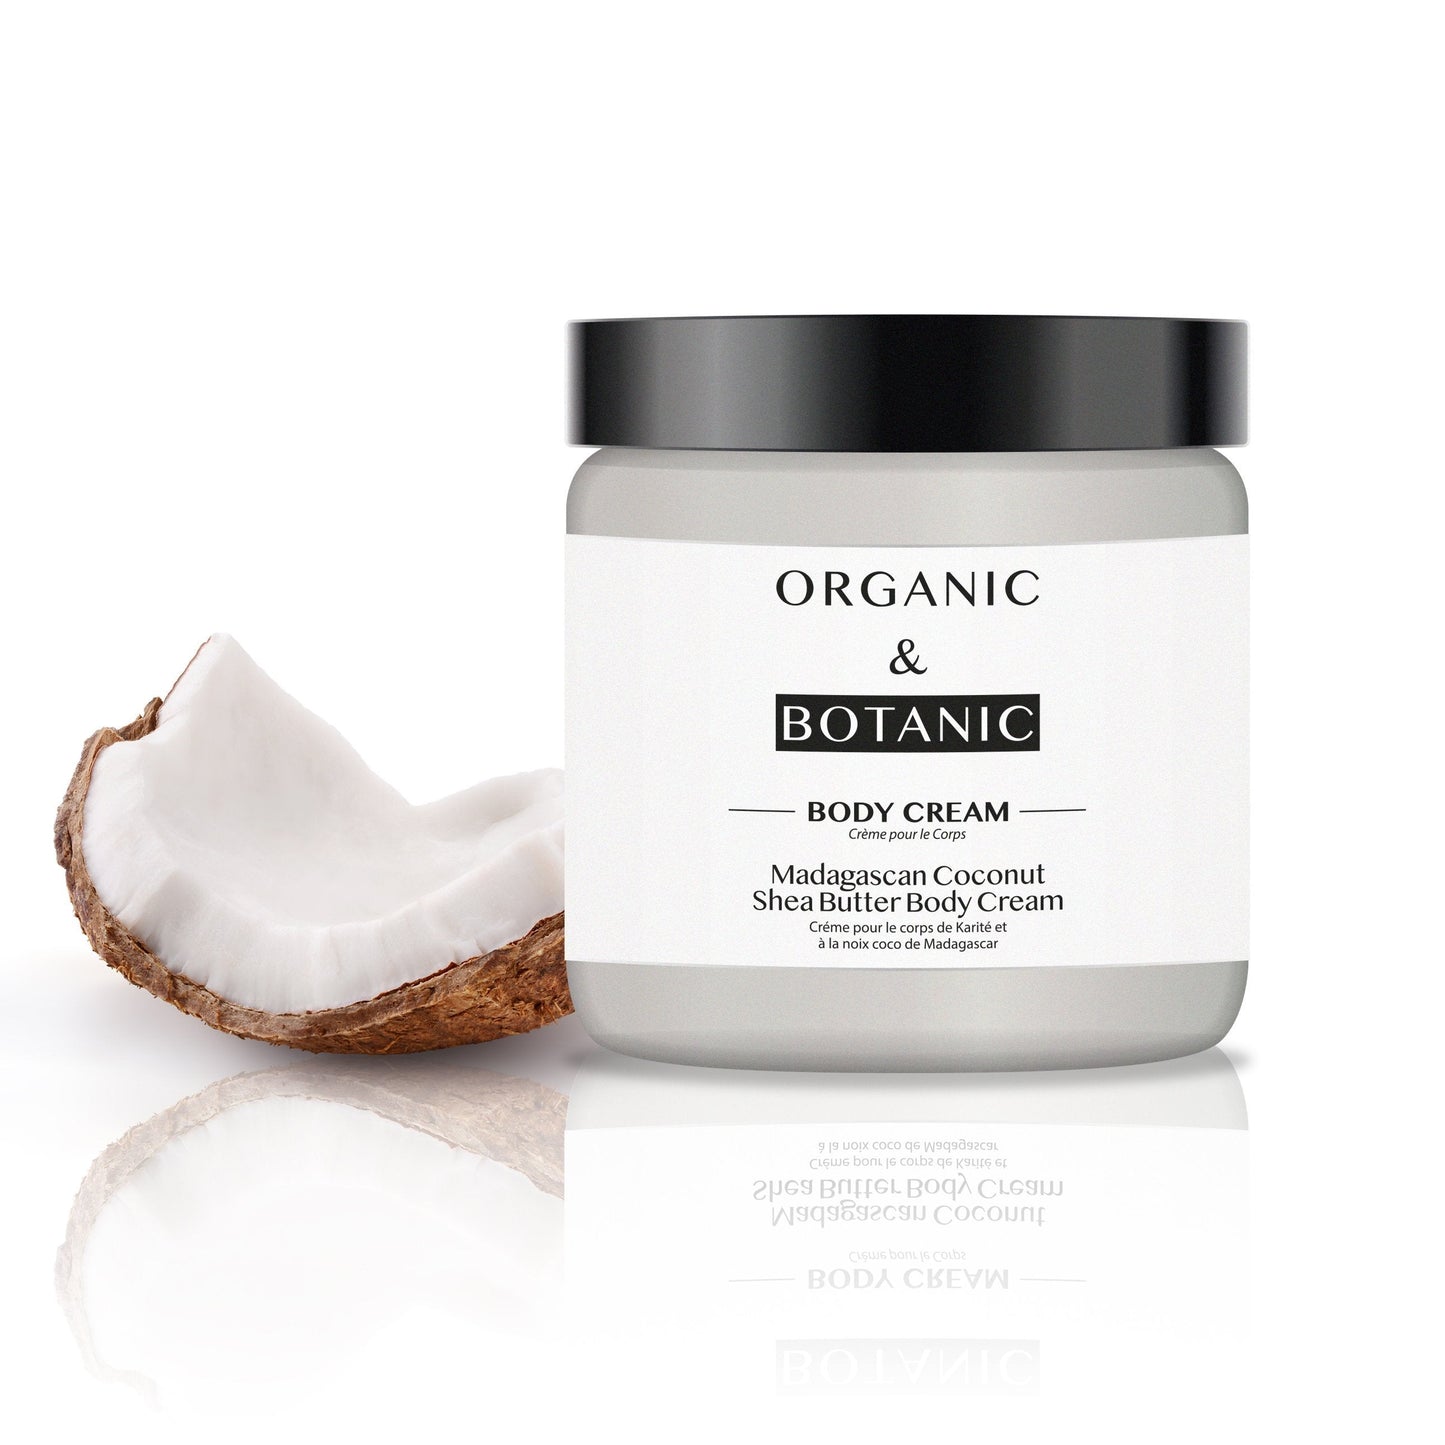 Limited Edition Madagascan Coconut Shea Butter Body Cream - Dr. Botanicals Skincare